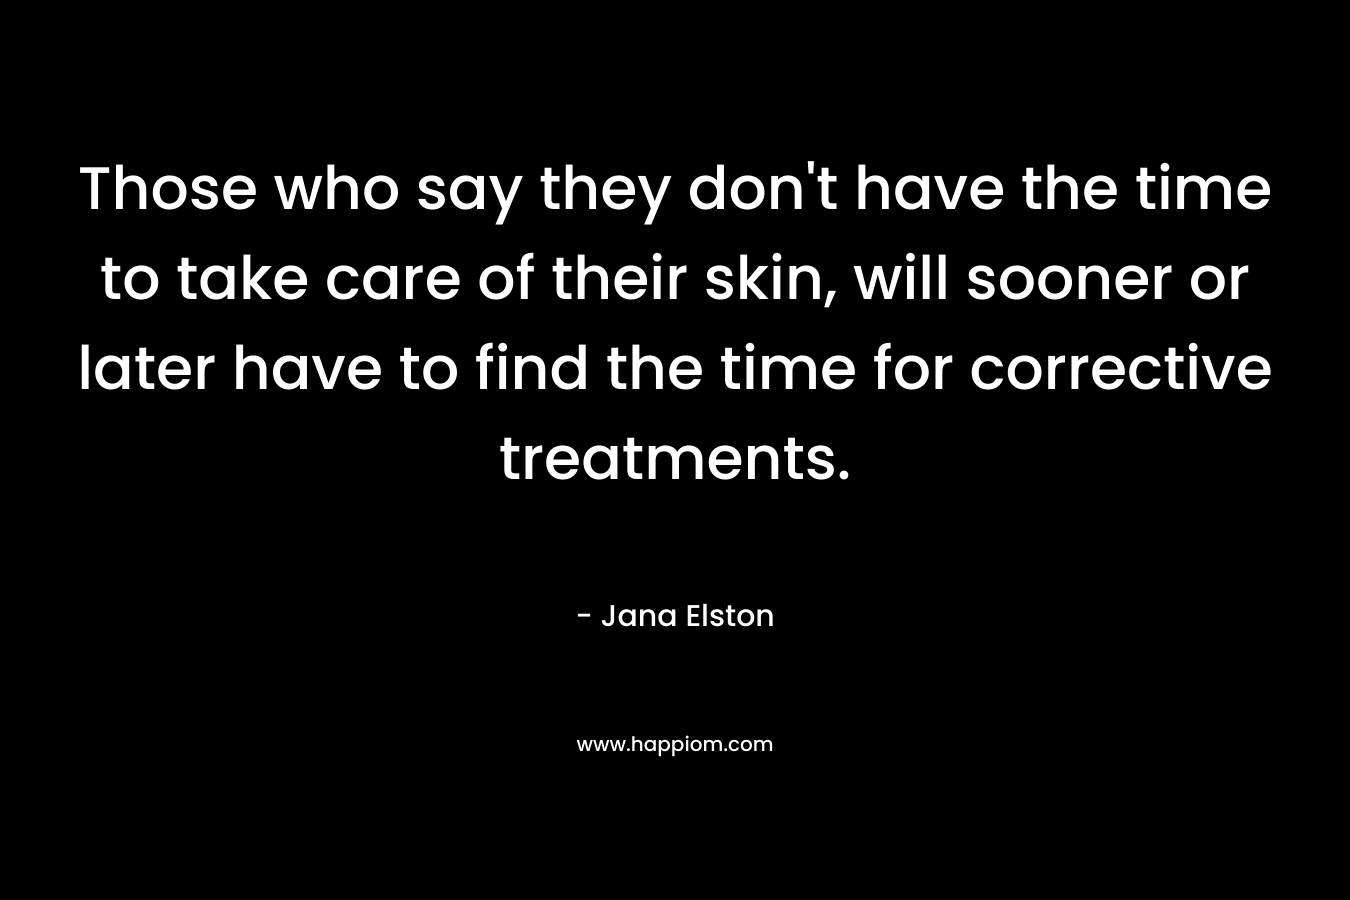 Those who say they don’t have the time to take care of their skin, will sooner or later have to find the time for corrective treatments. – Jana Elston